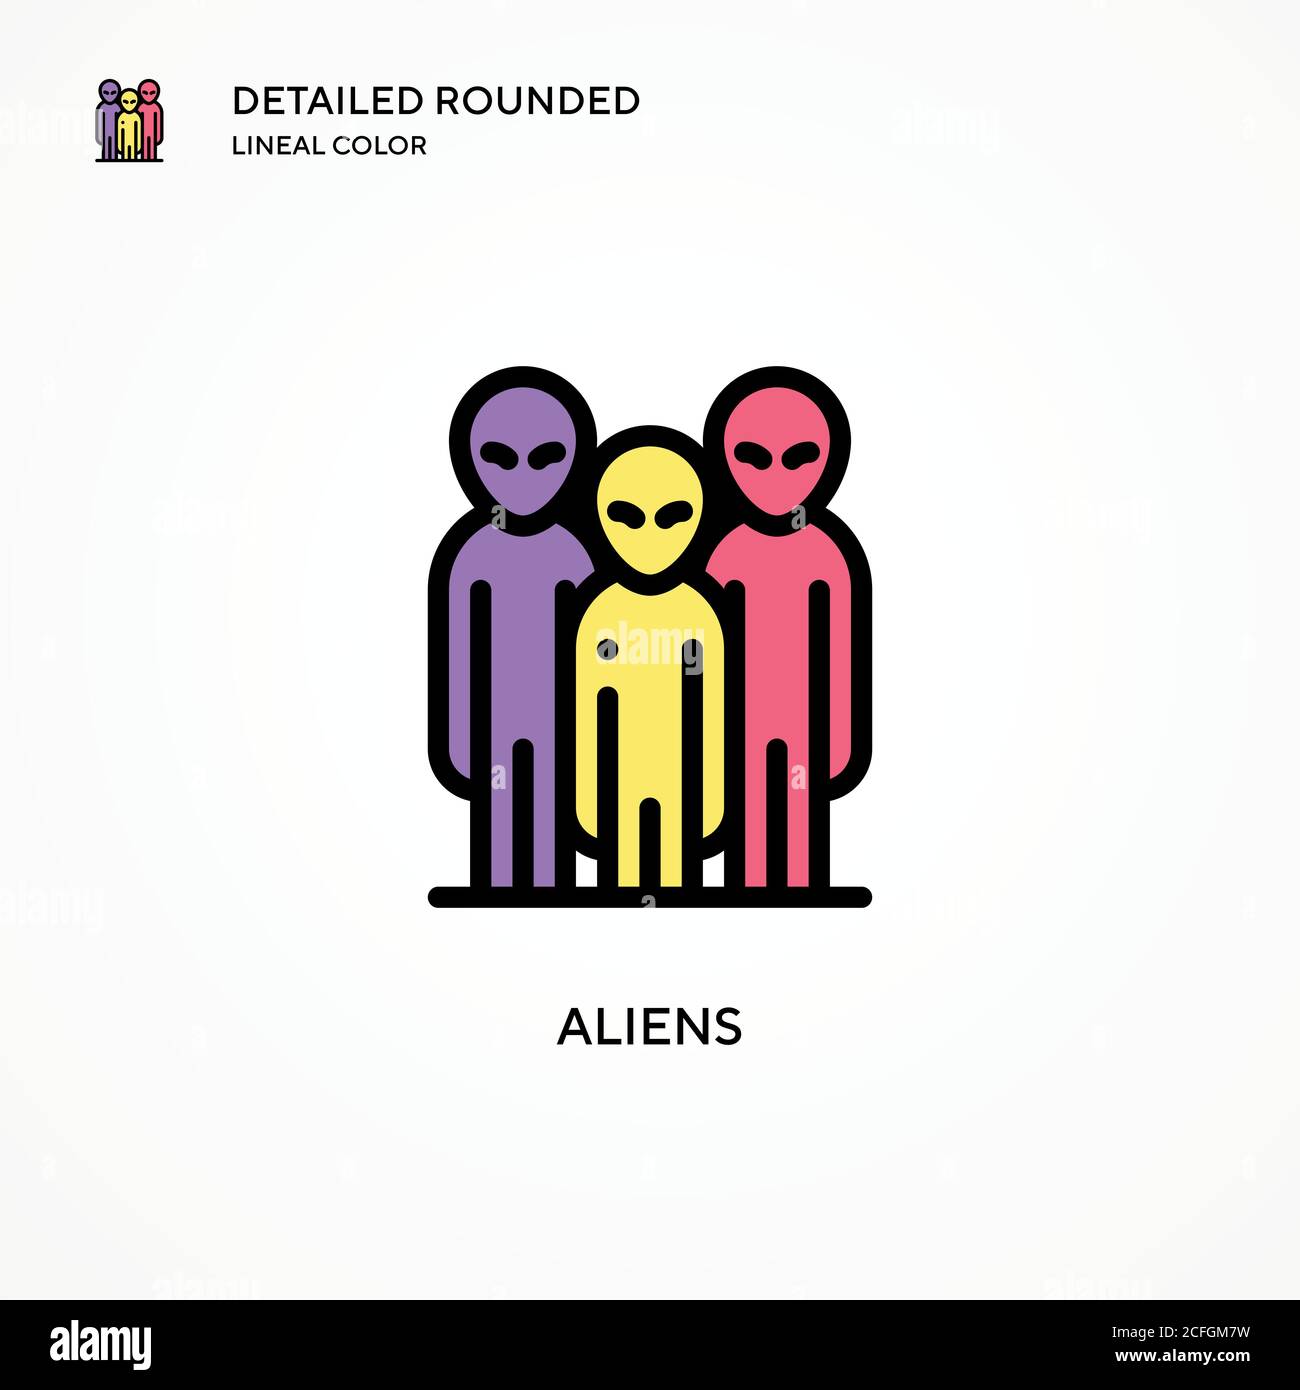 Aliens vector icon. Modern vector illustration concepts. Easy to edit and customize. Stock Vector